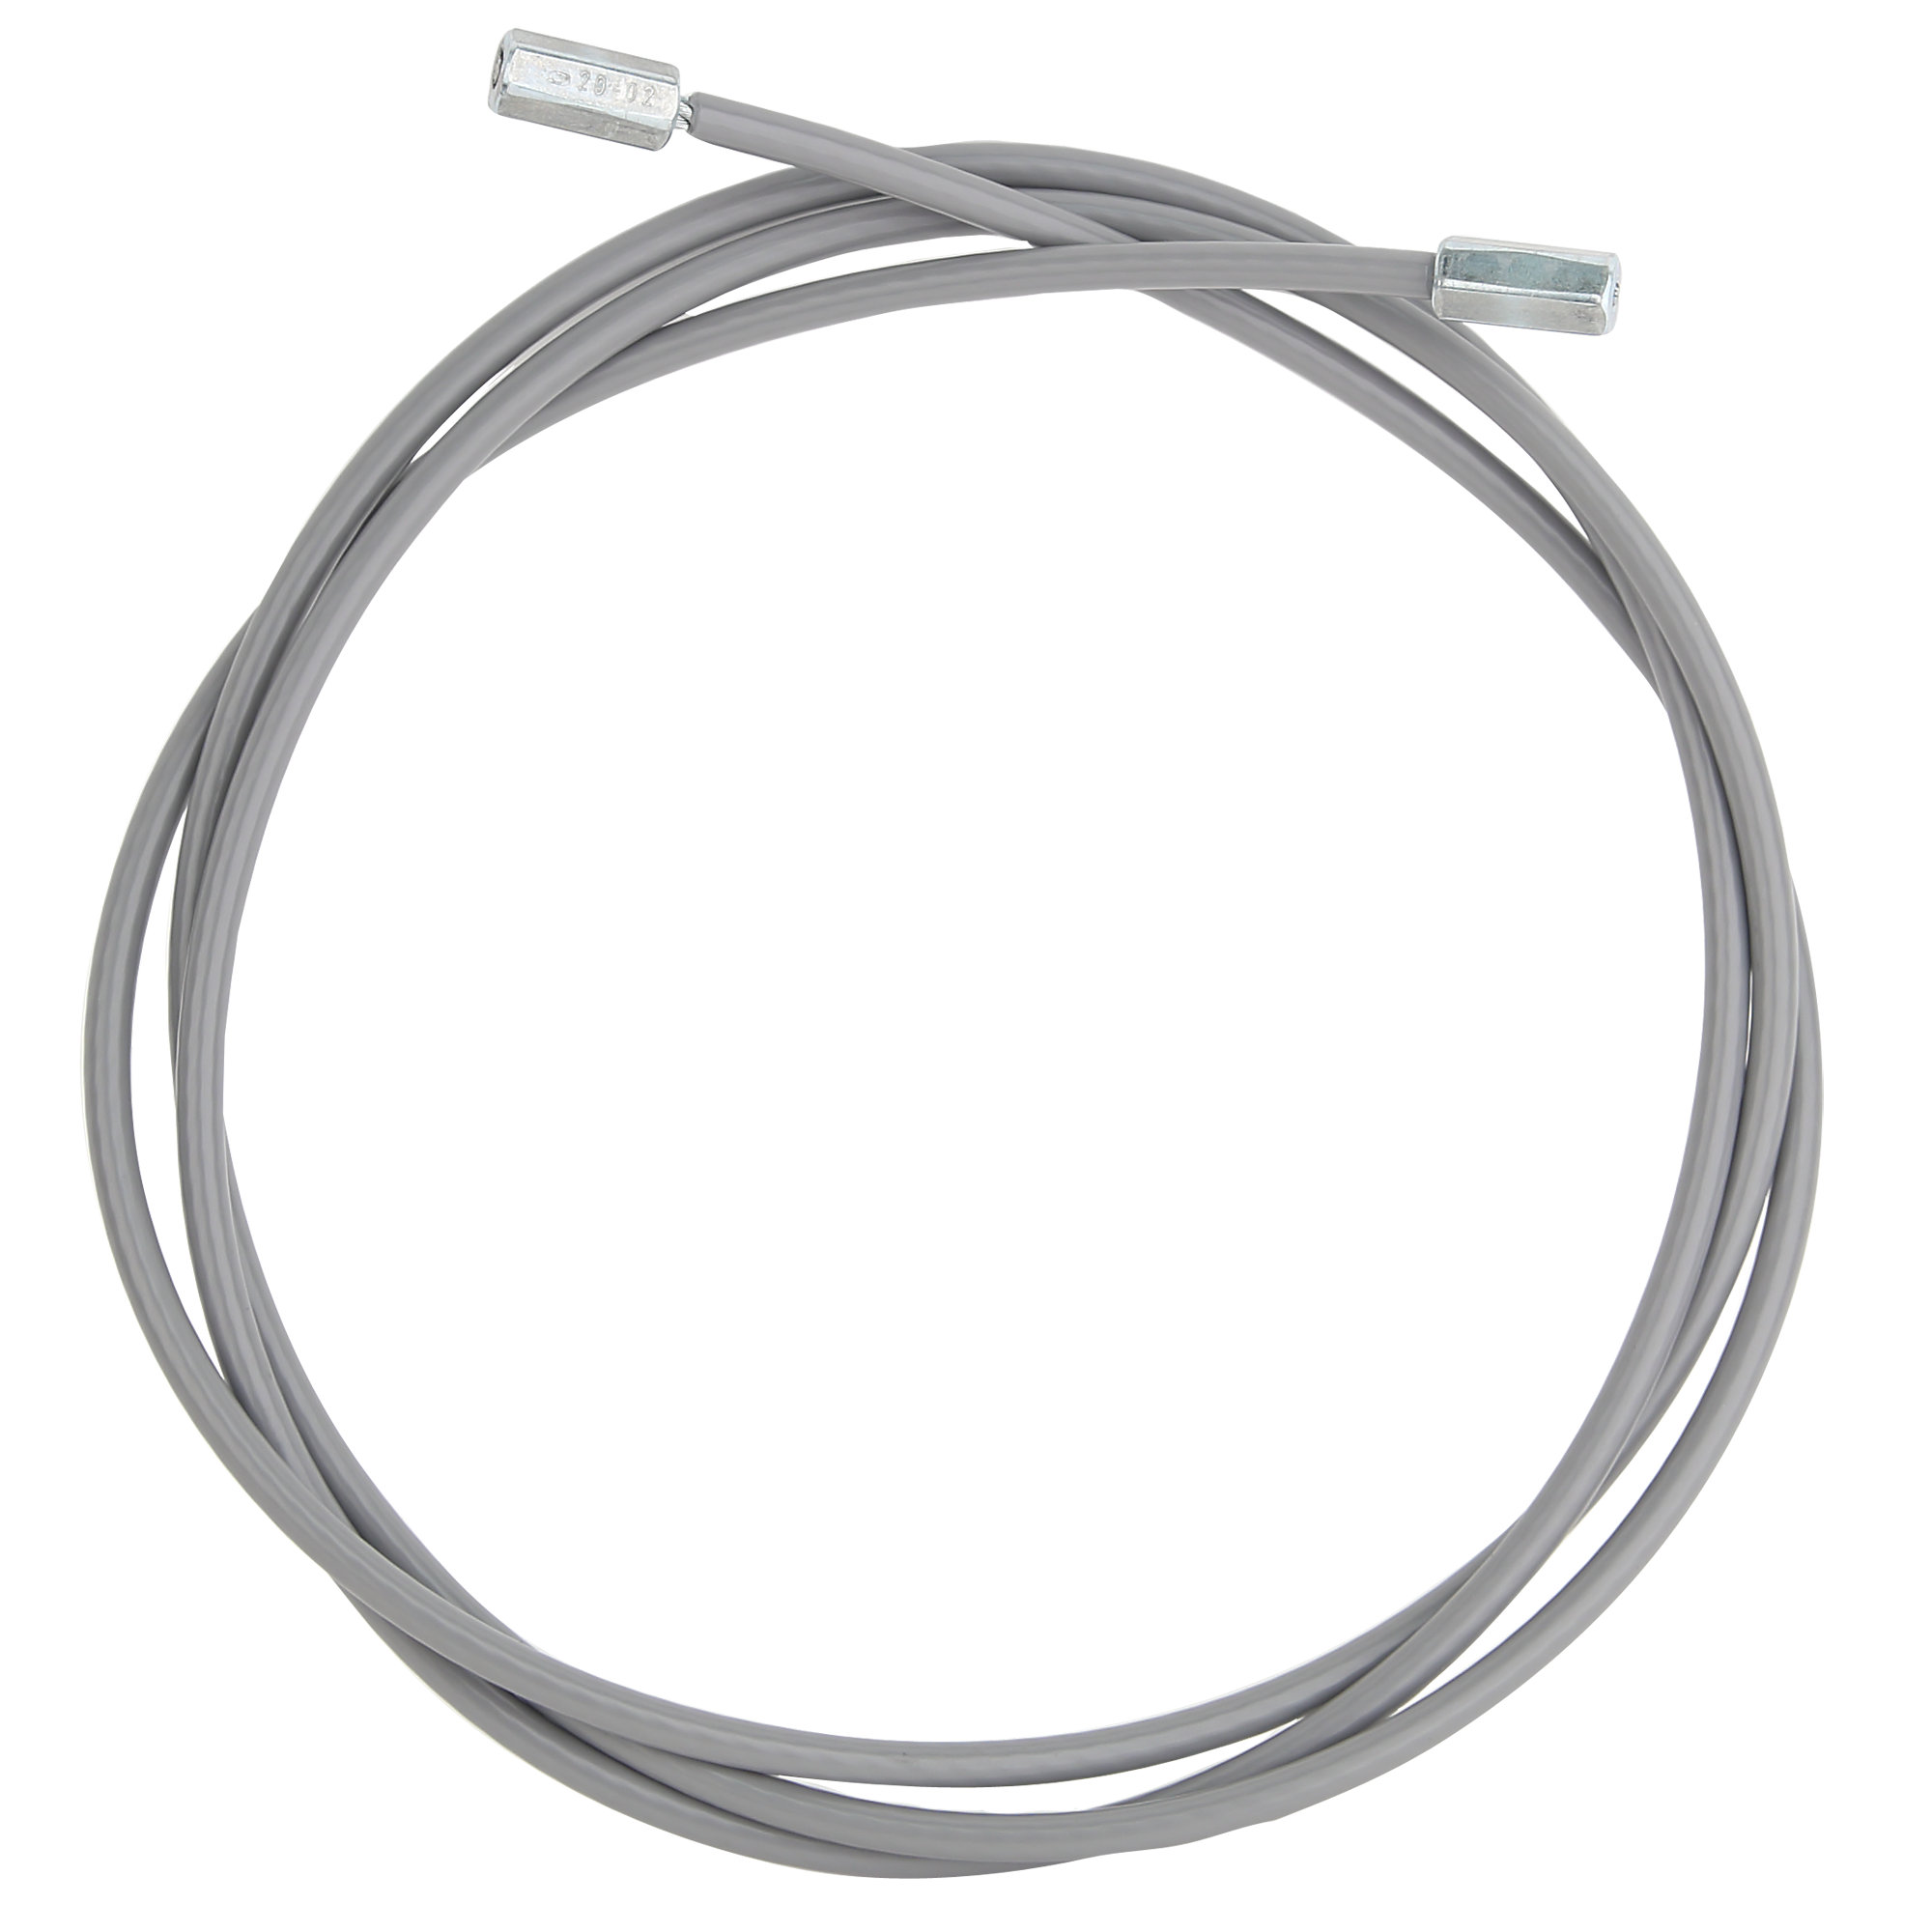 Cable for certain Strength Machines by Cybex 11110-002